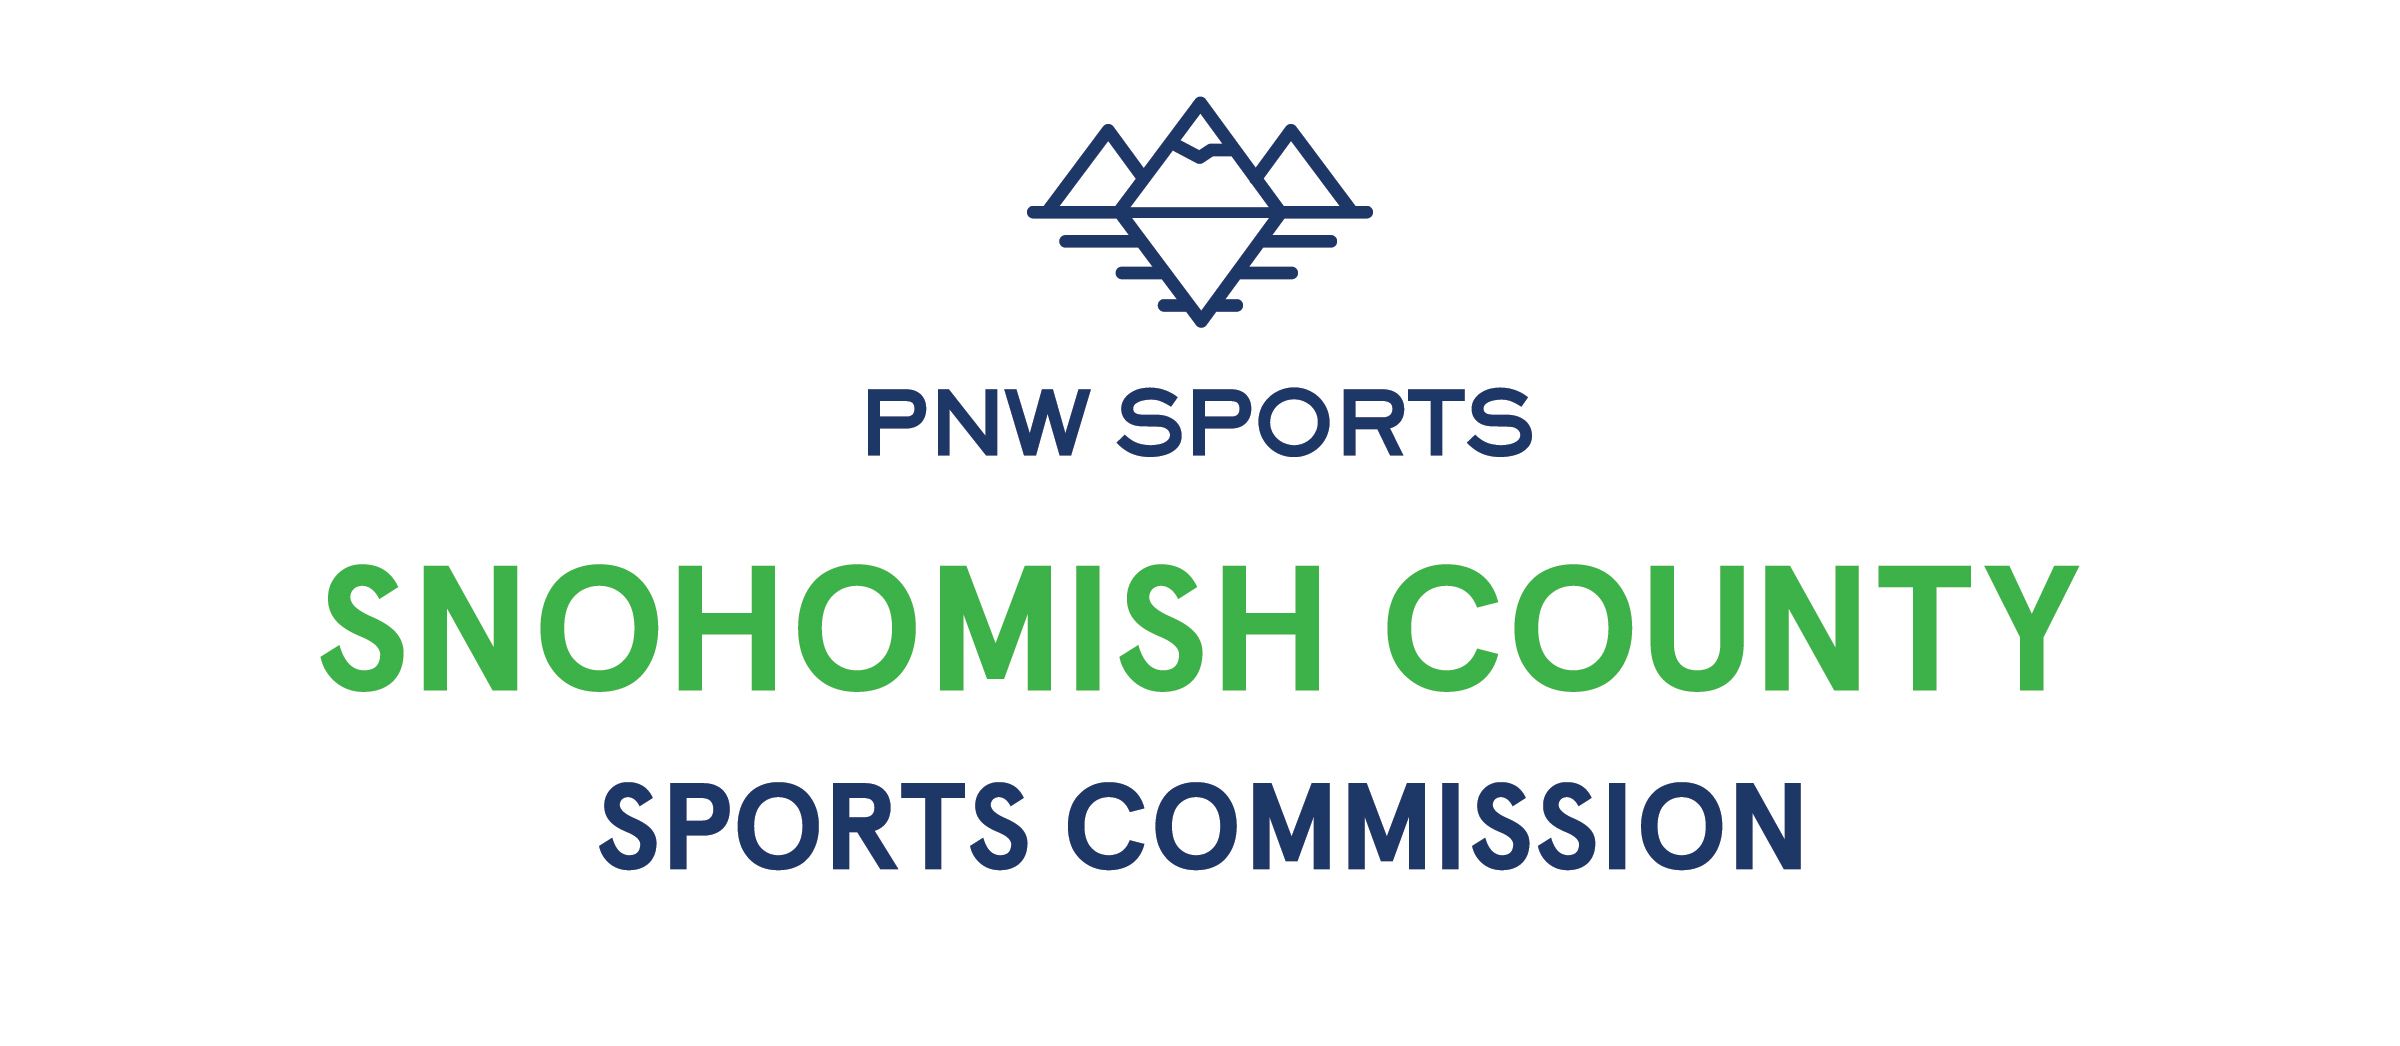 Snohomish County Sport Commission